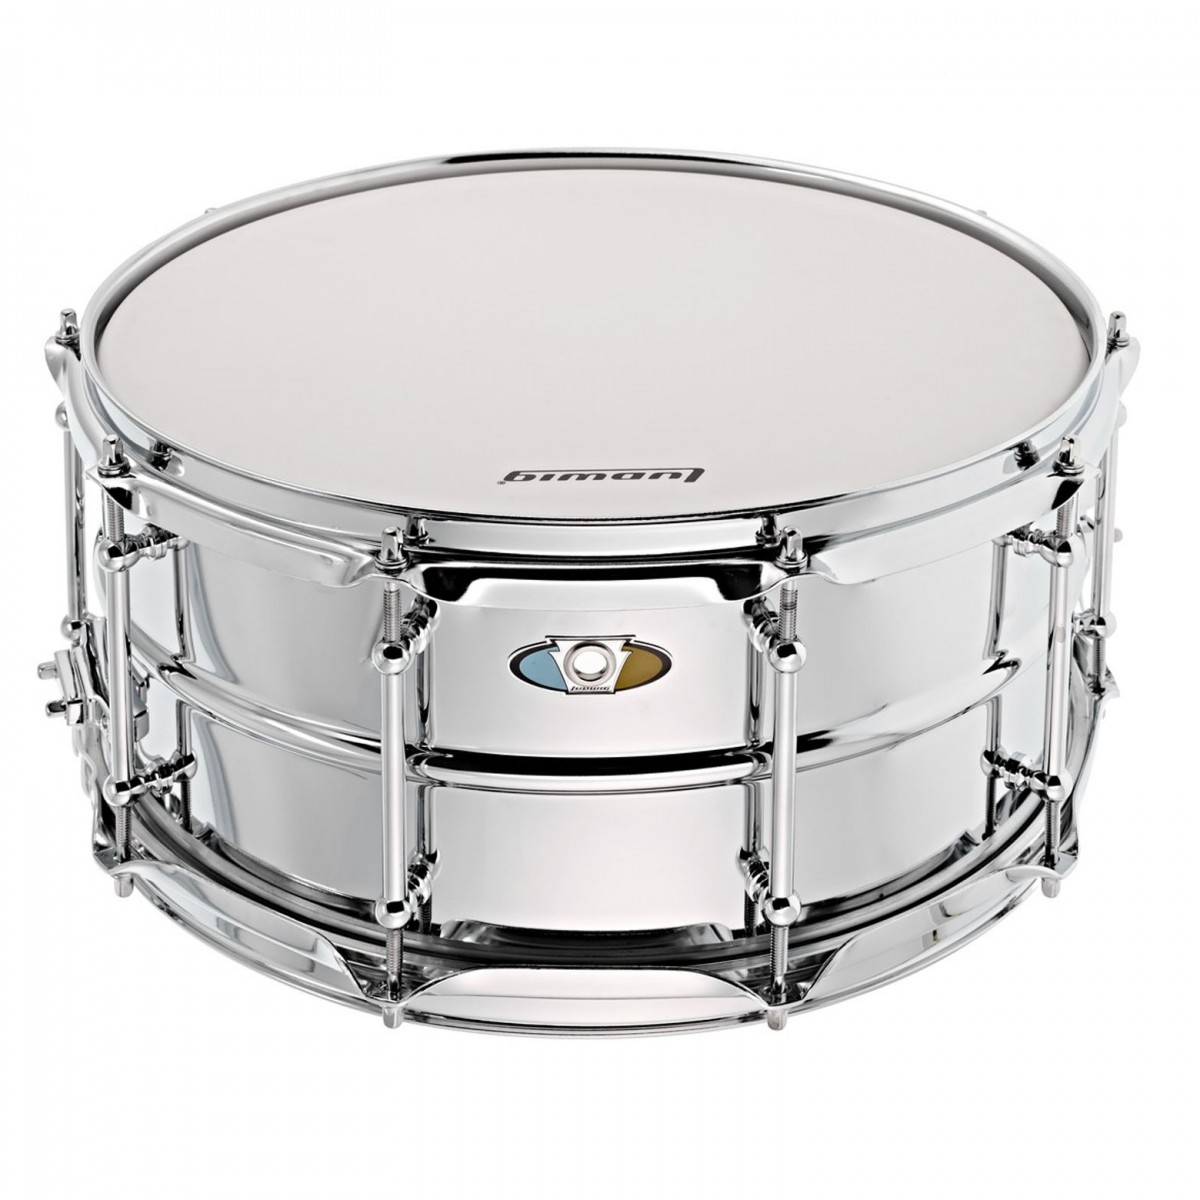 An image of Ludwig LU6514SL 14x 6.5 Steel Supralite Snare Drum with Ludwig P88 strainer